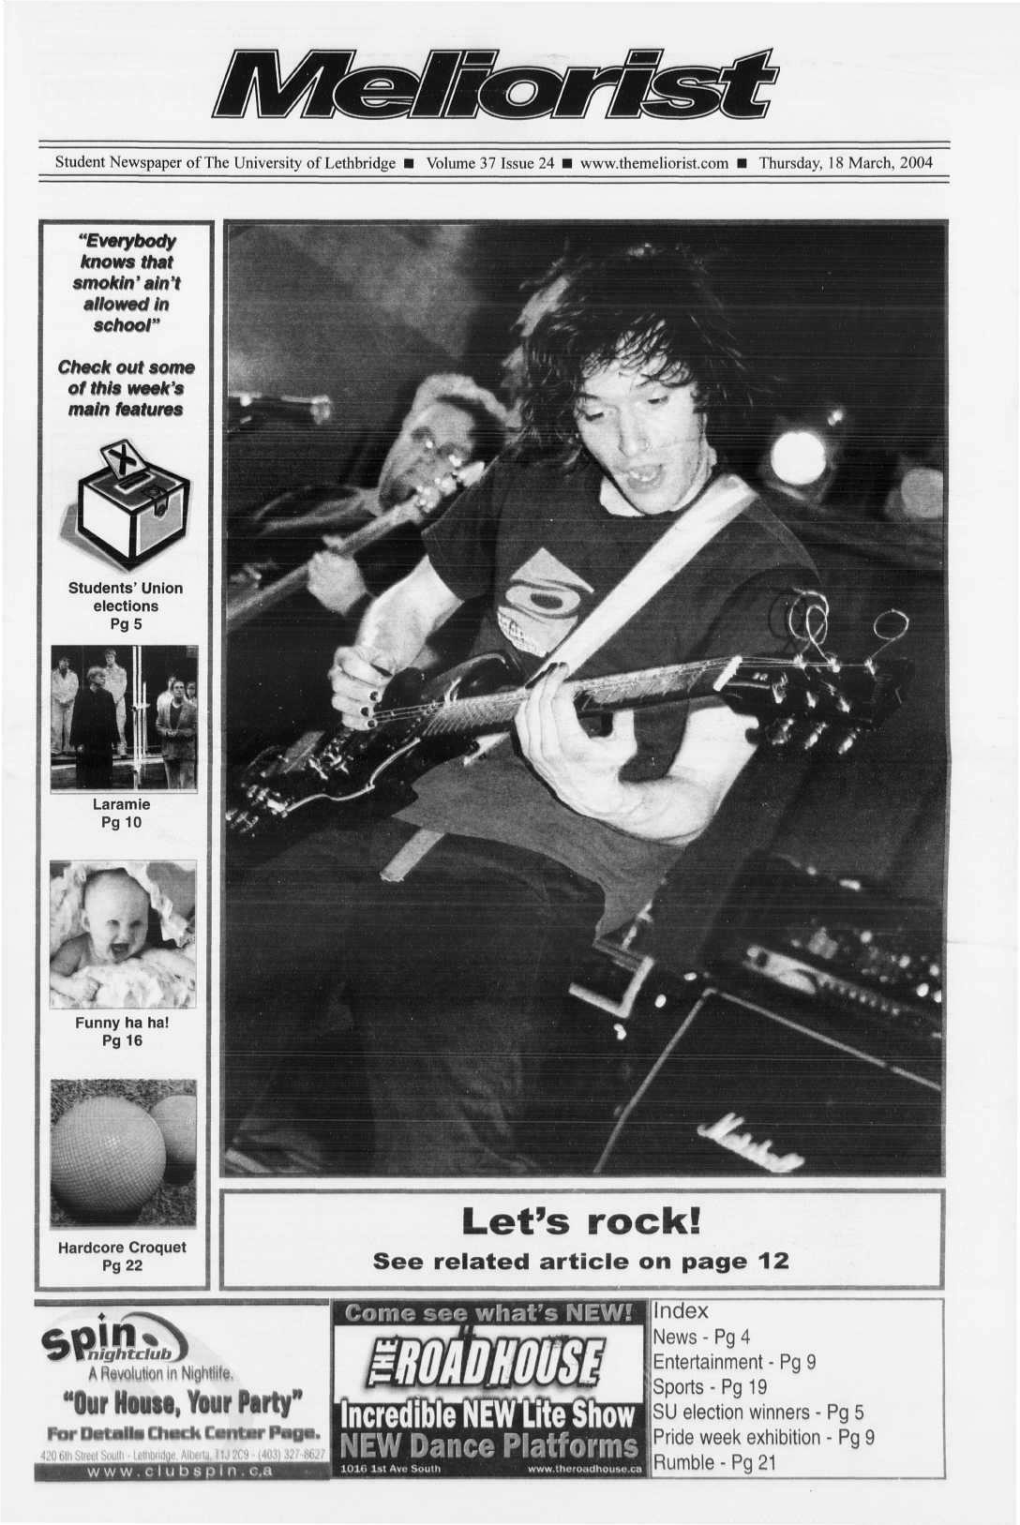 Let's Rock! Hardcore Croquet Pg22 See Related Article on Page 12